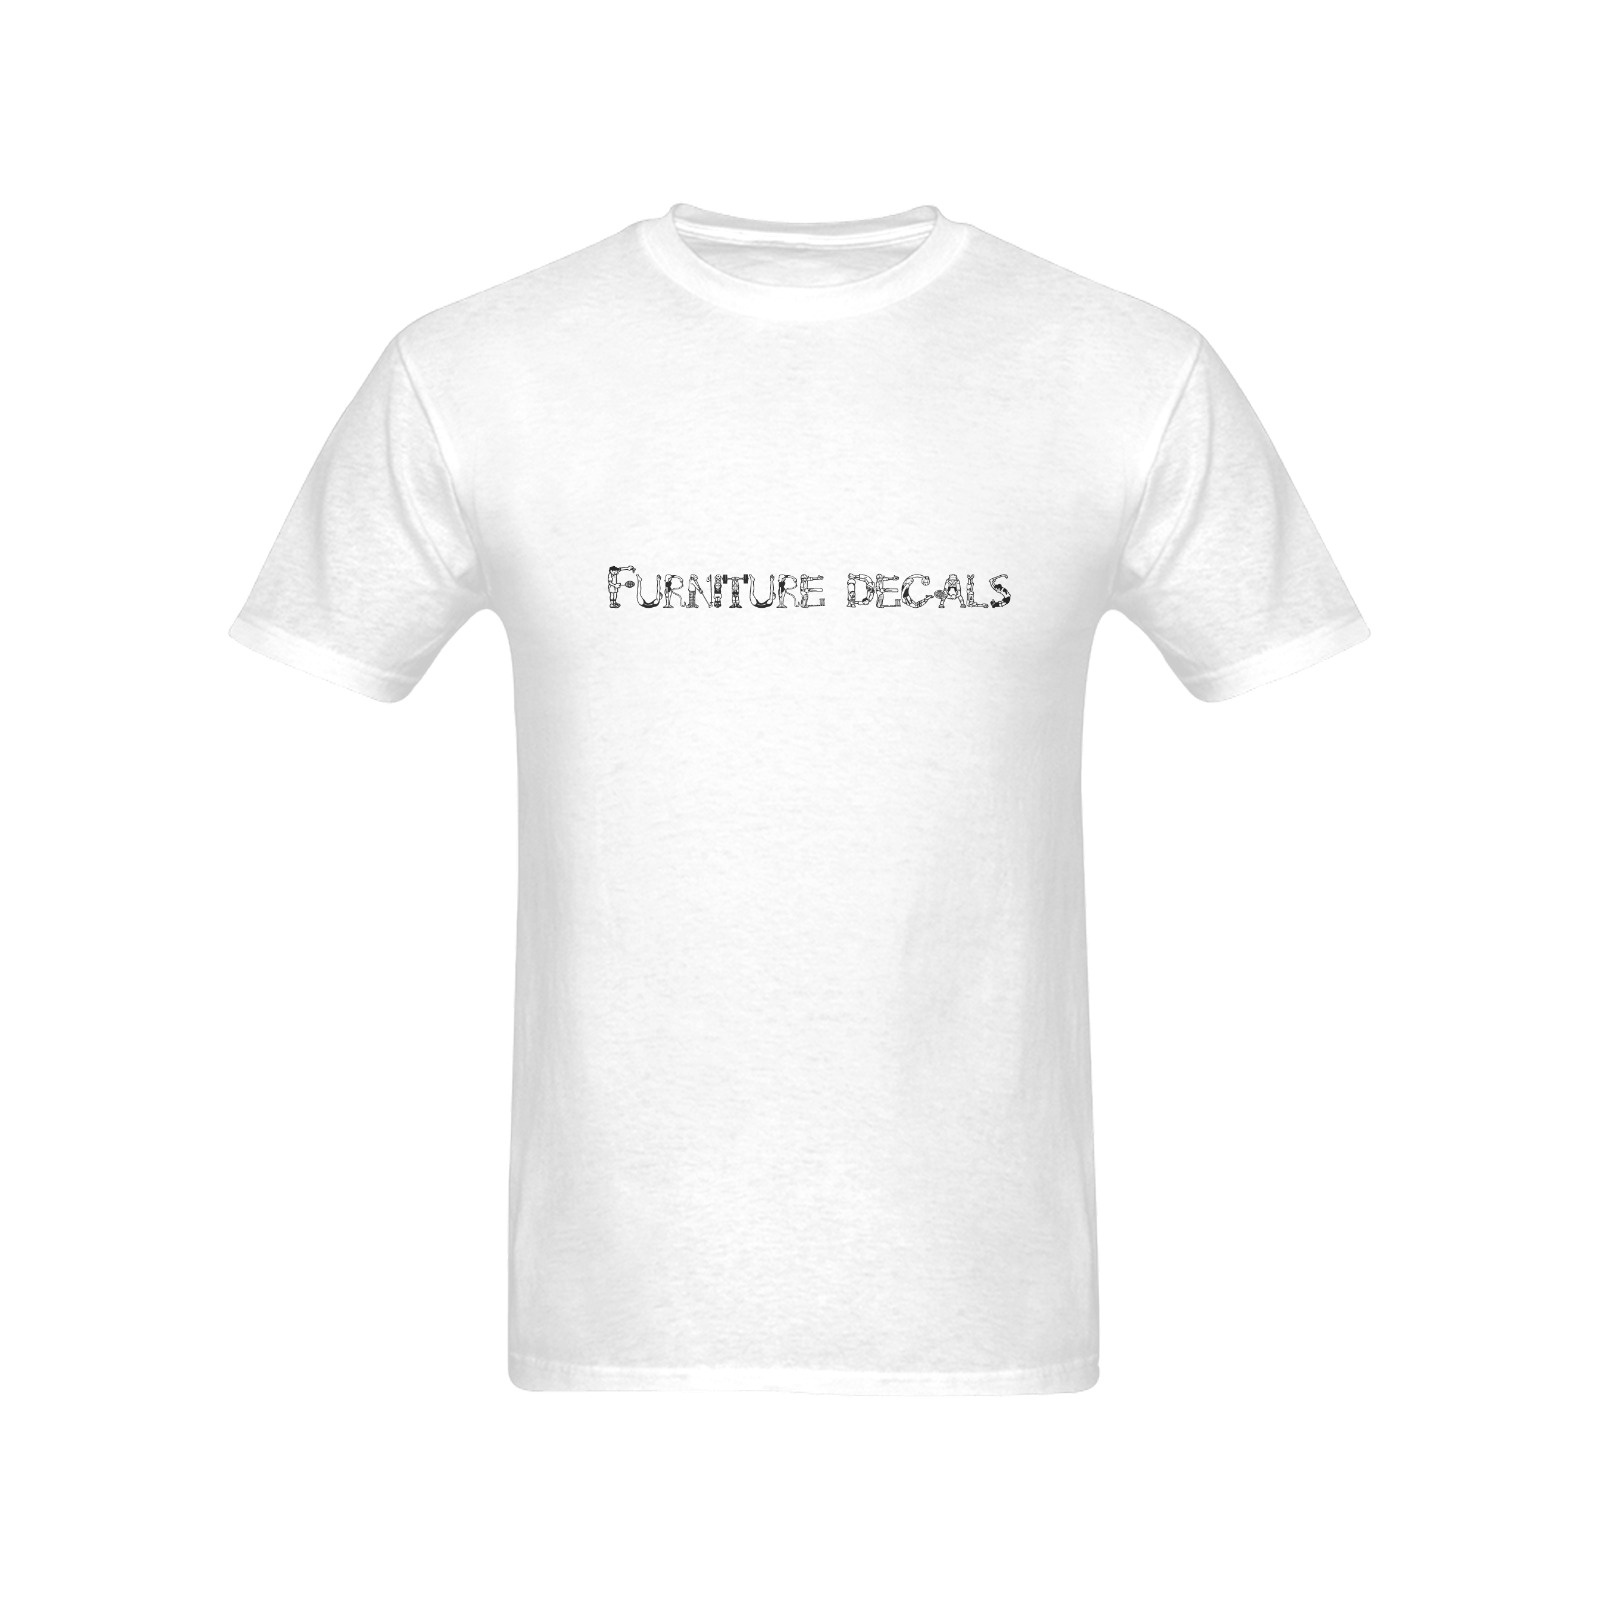 Furniture decals Men's T-Shirt in USA Size (Two Sides Printing)